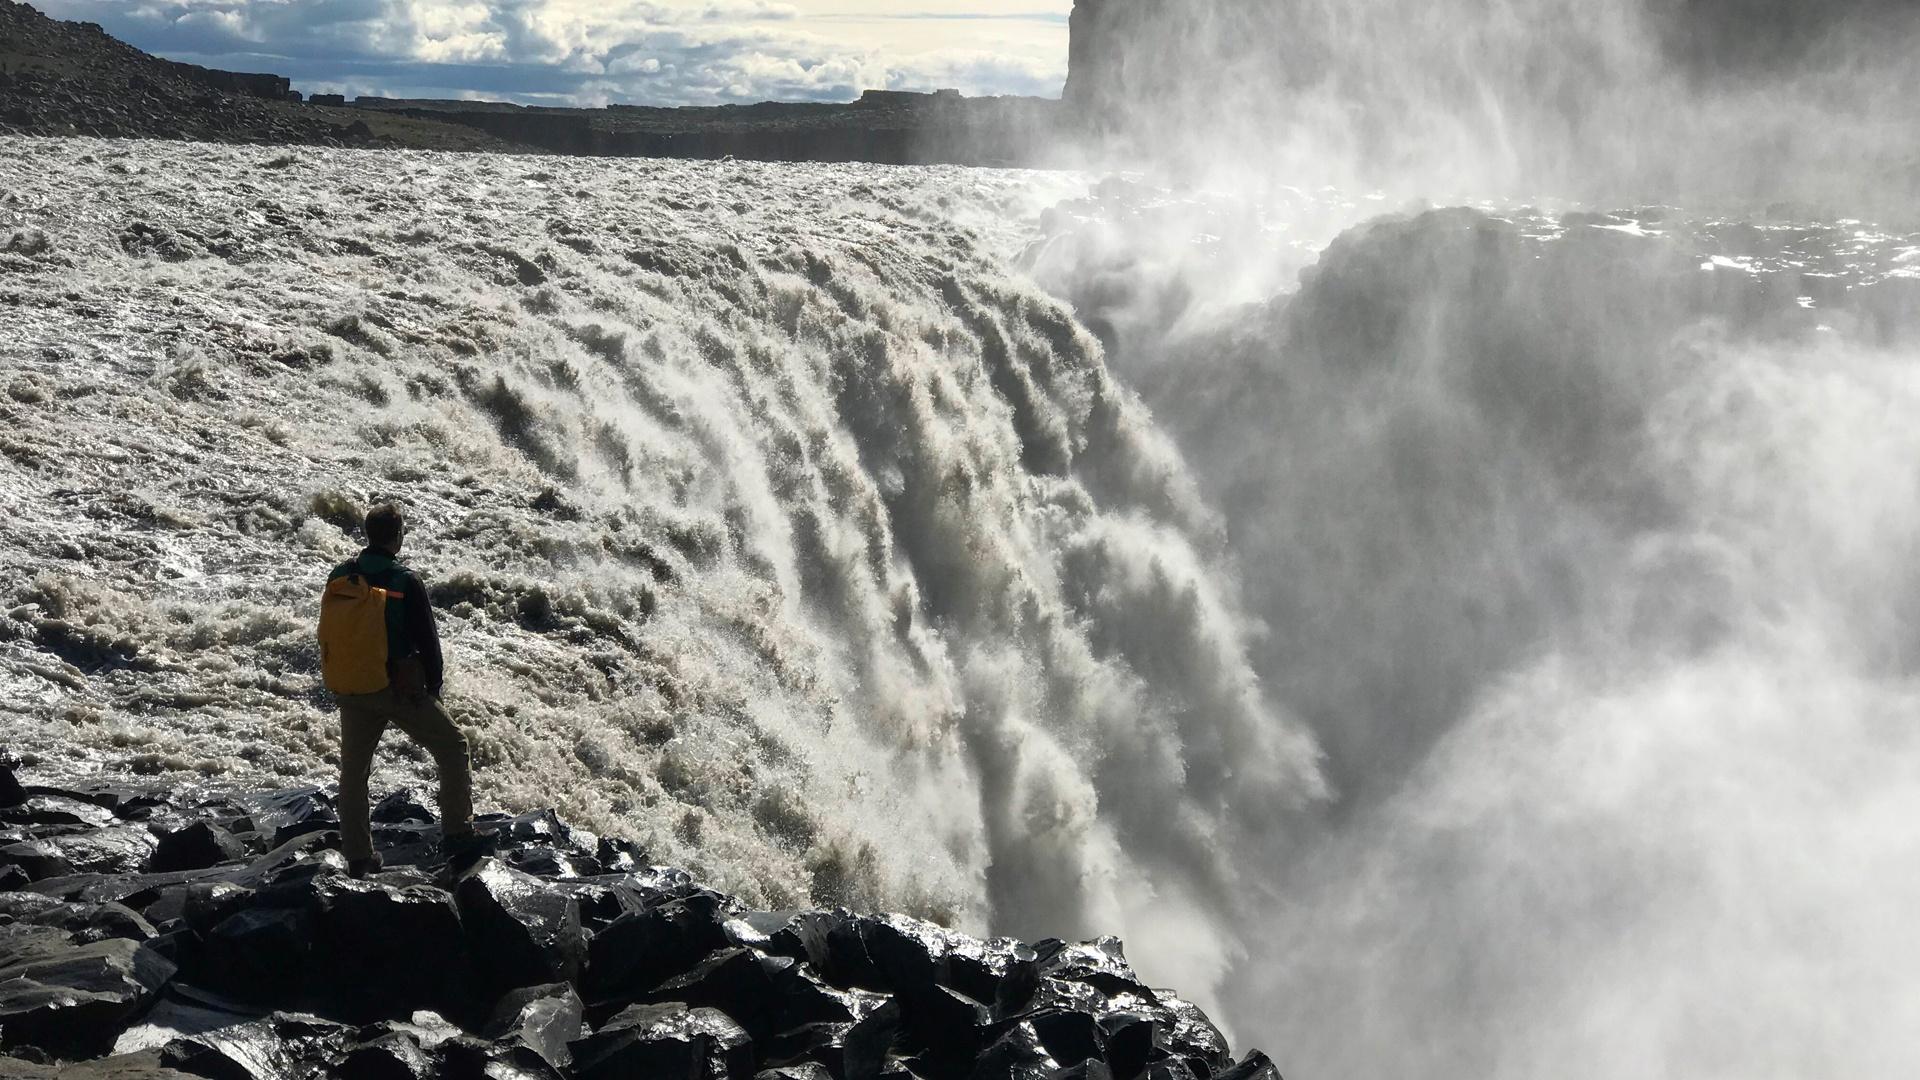 Stephen Mojzsi, geologist, stands at the top of a waterfall in Isua, Greenland.